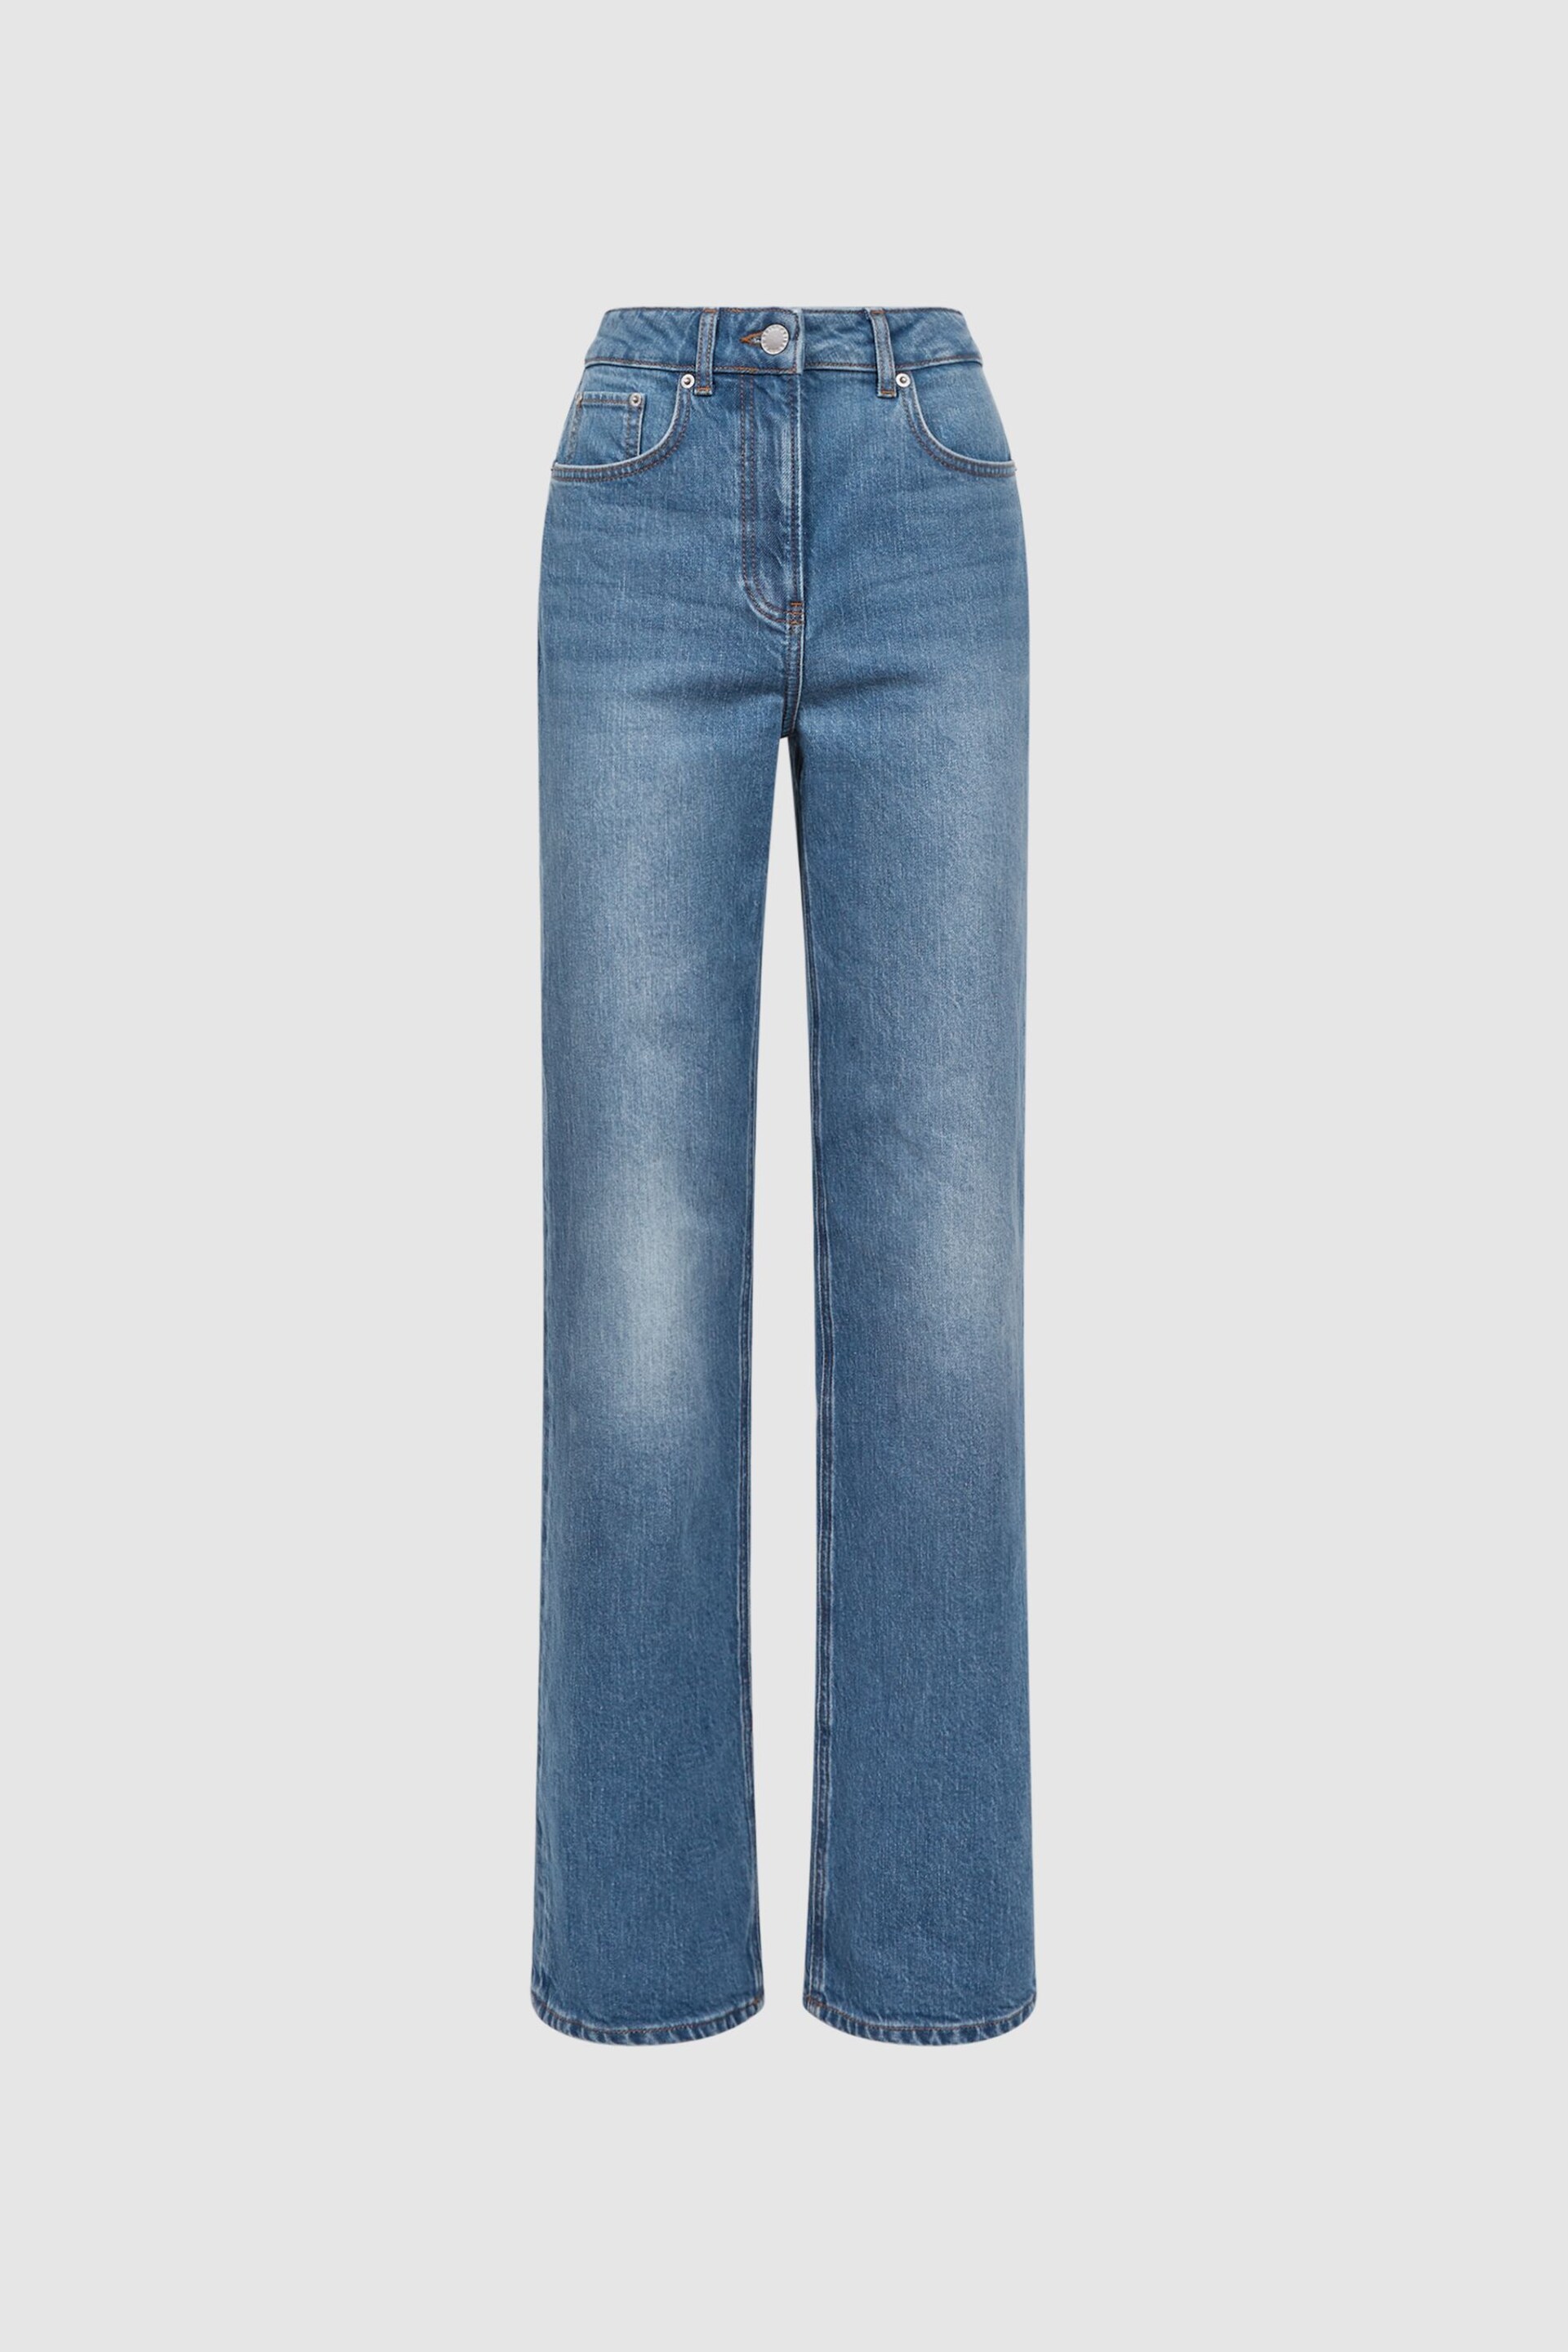 Reiss Mid Blue Marion Petite Mid Rise Wide Leg Jeans - Image 2 of 5